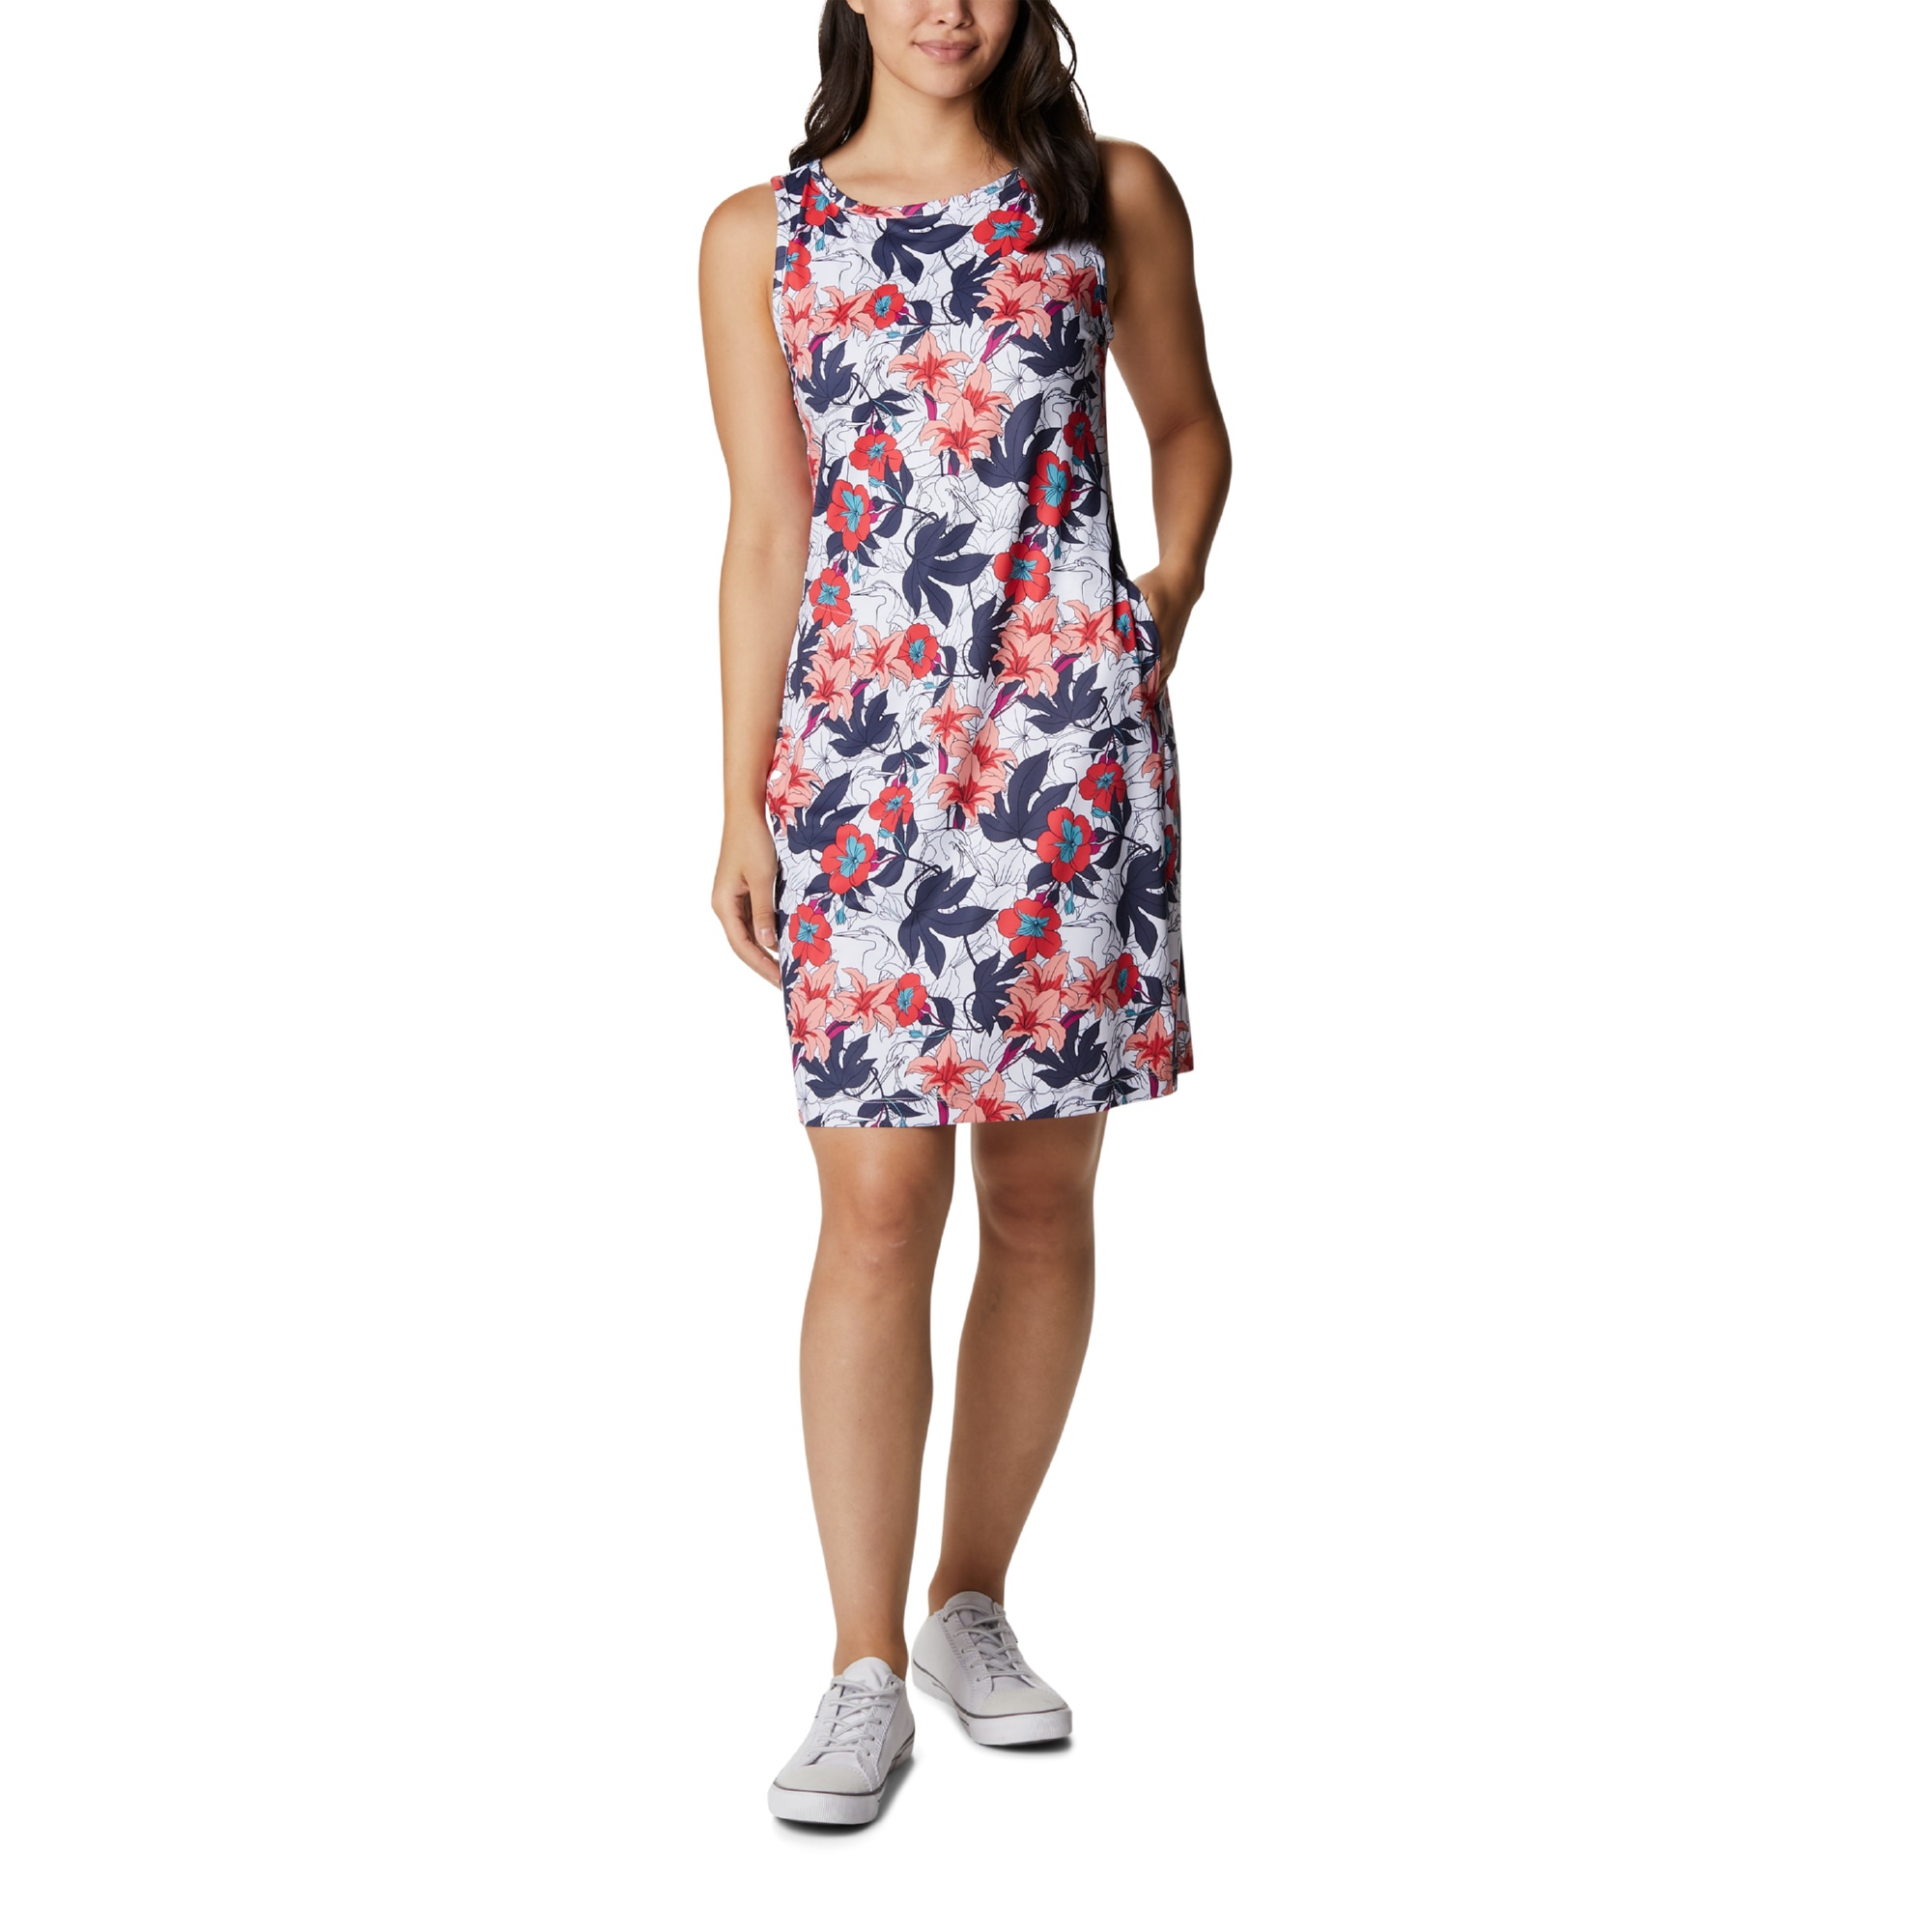 Women's Chill River Printed Dress